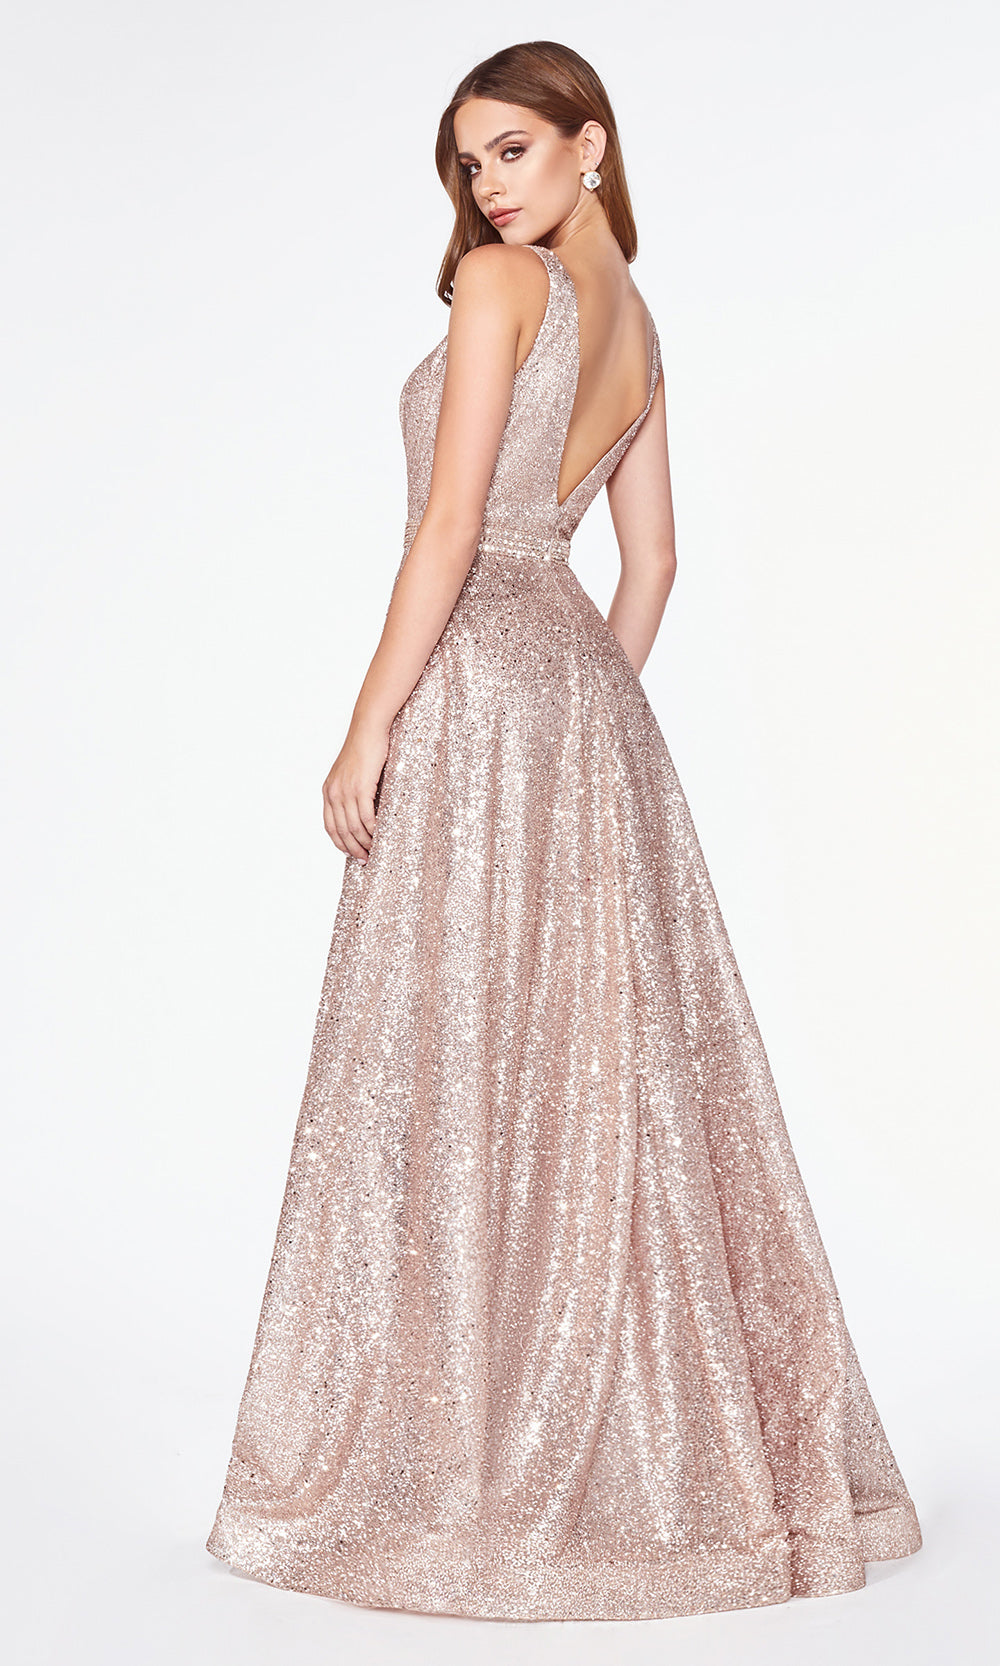 Cinderella Divine CJ533 long flowy v neck sequin beaded rose gold dress with wide straps and flowy skirt Close up of front of dress-back